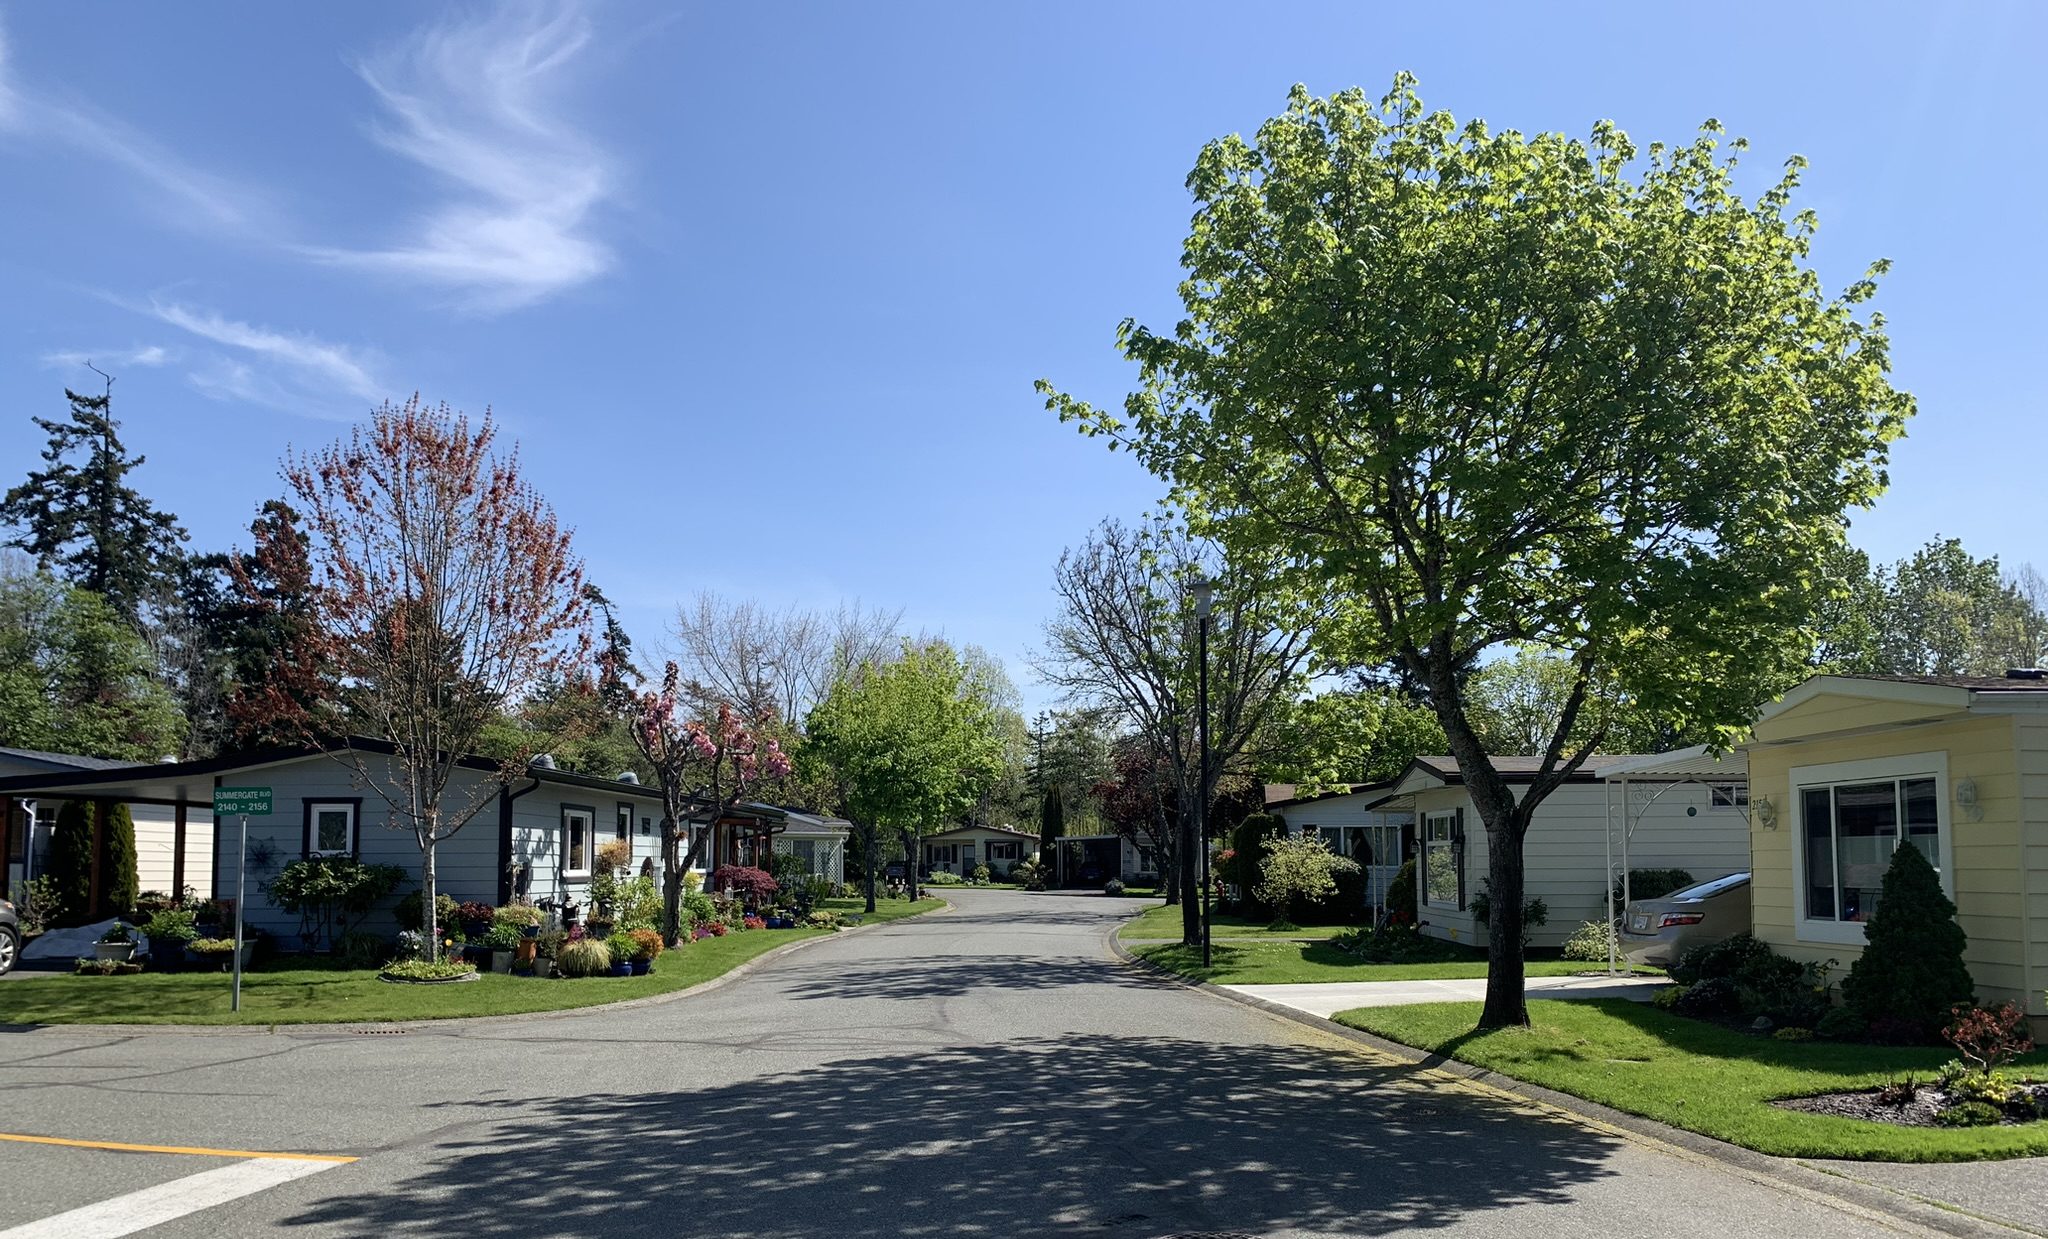 Image of a tree-lined street on a sunny blue-sky day in Summergate Villate